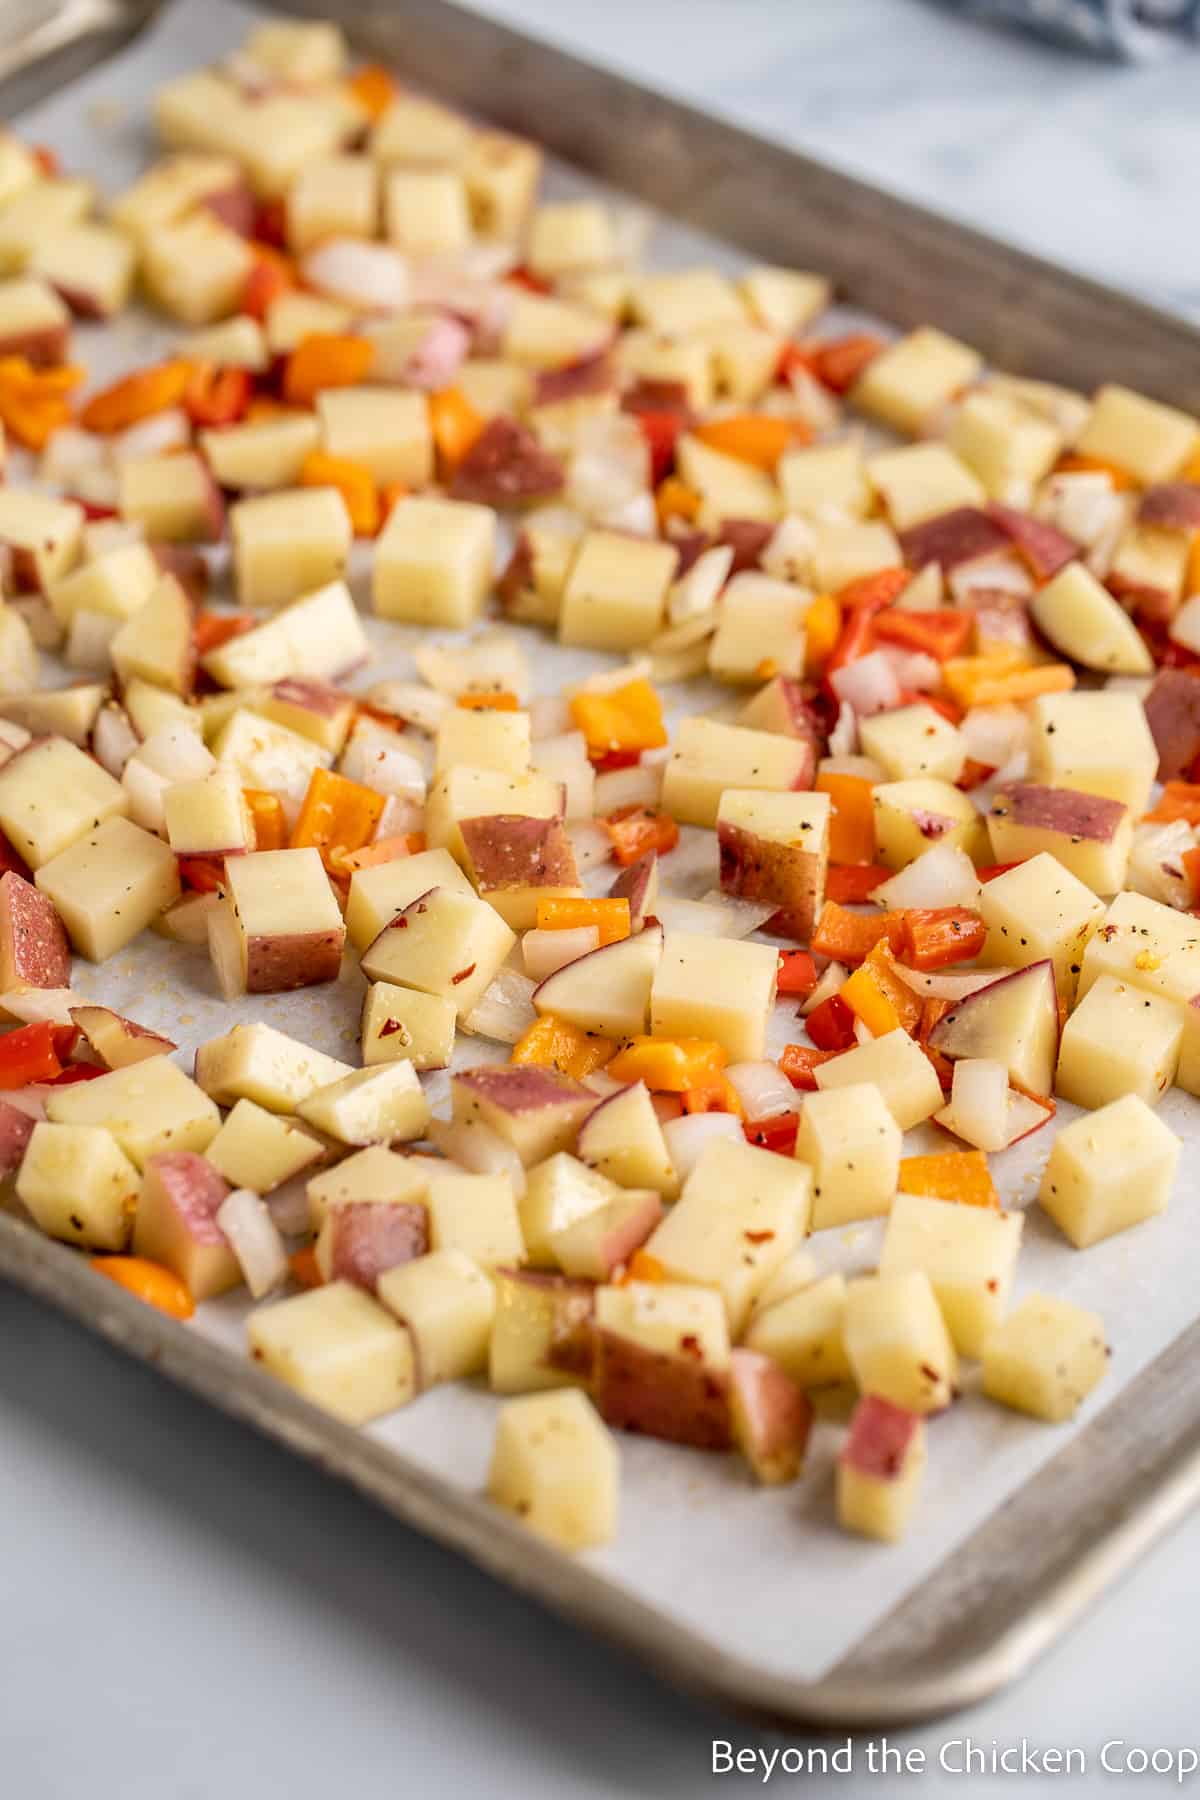 Cubed potatoes on a baking sheet.